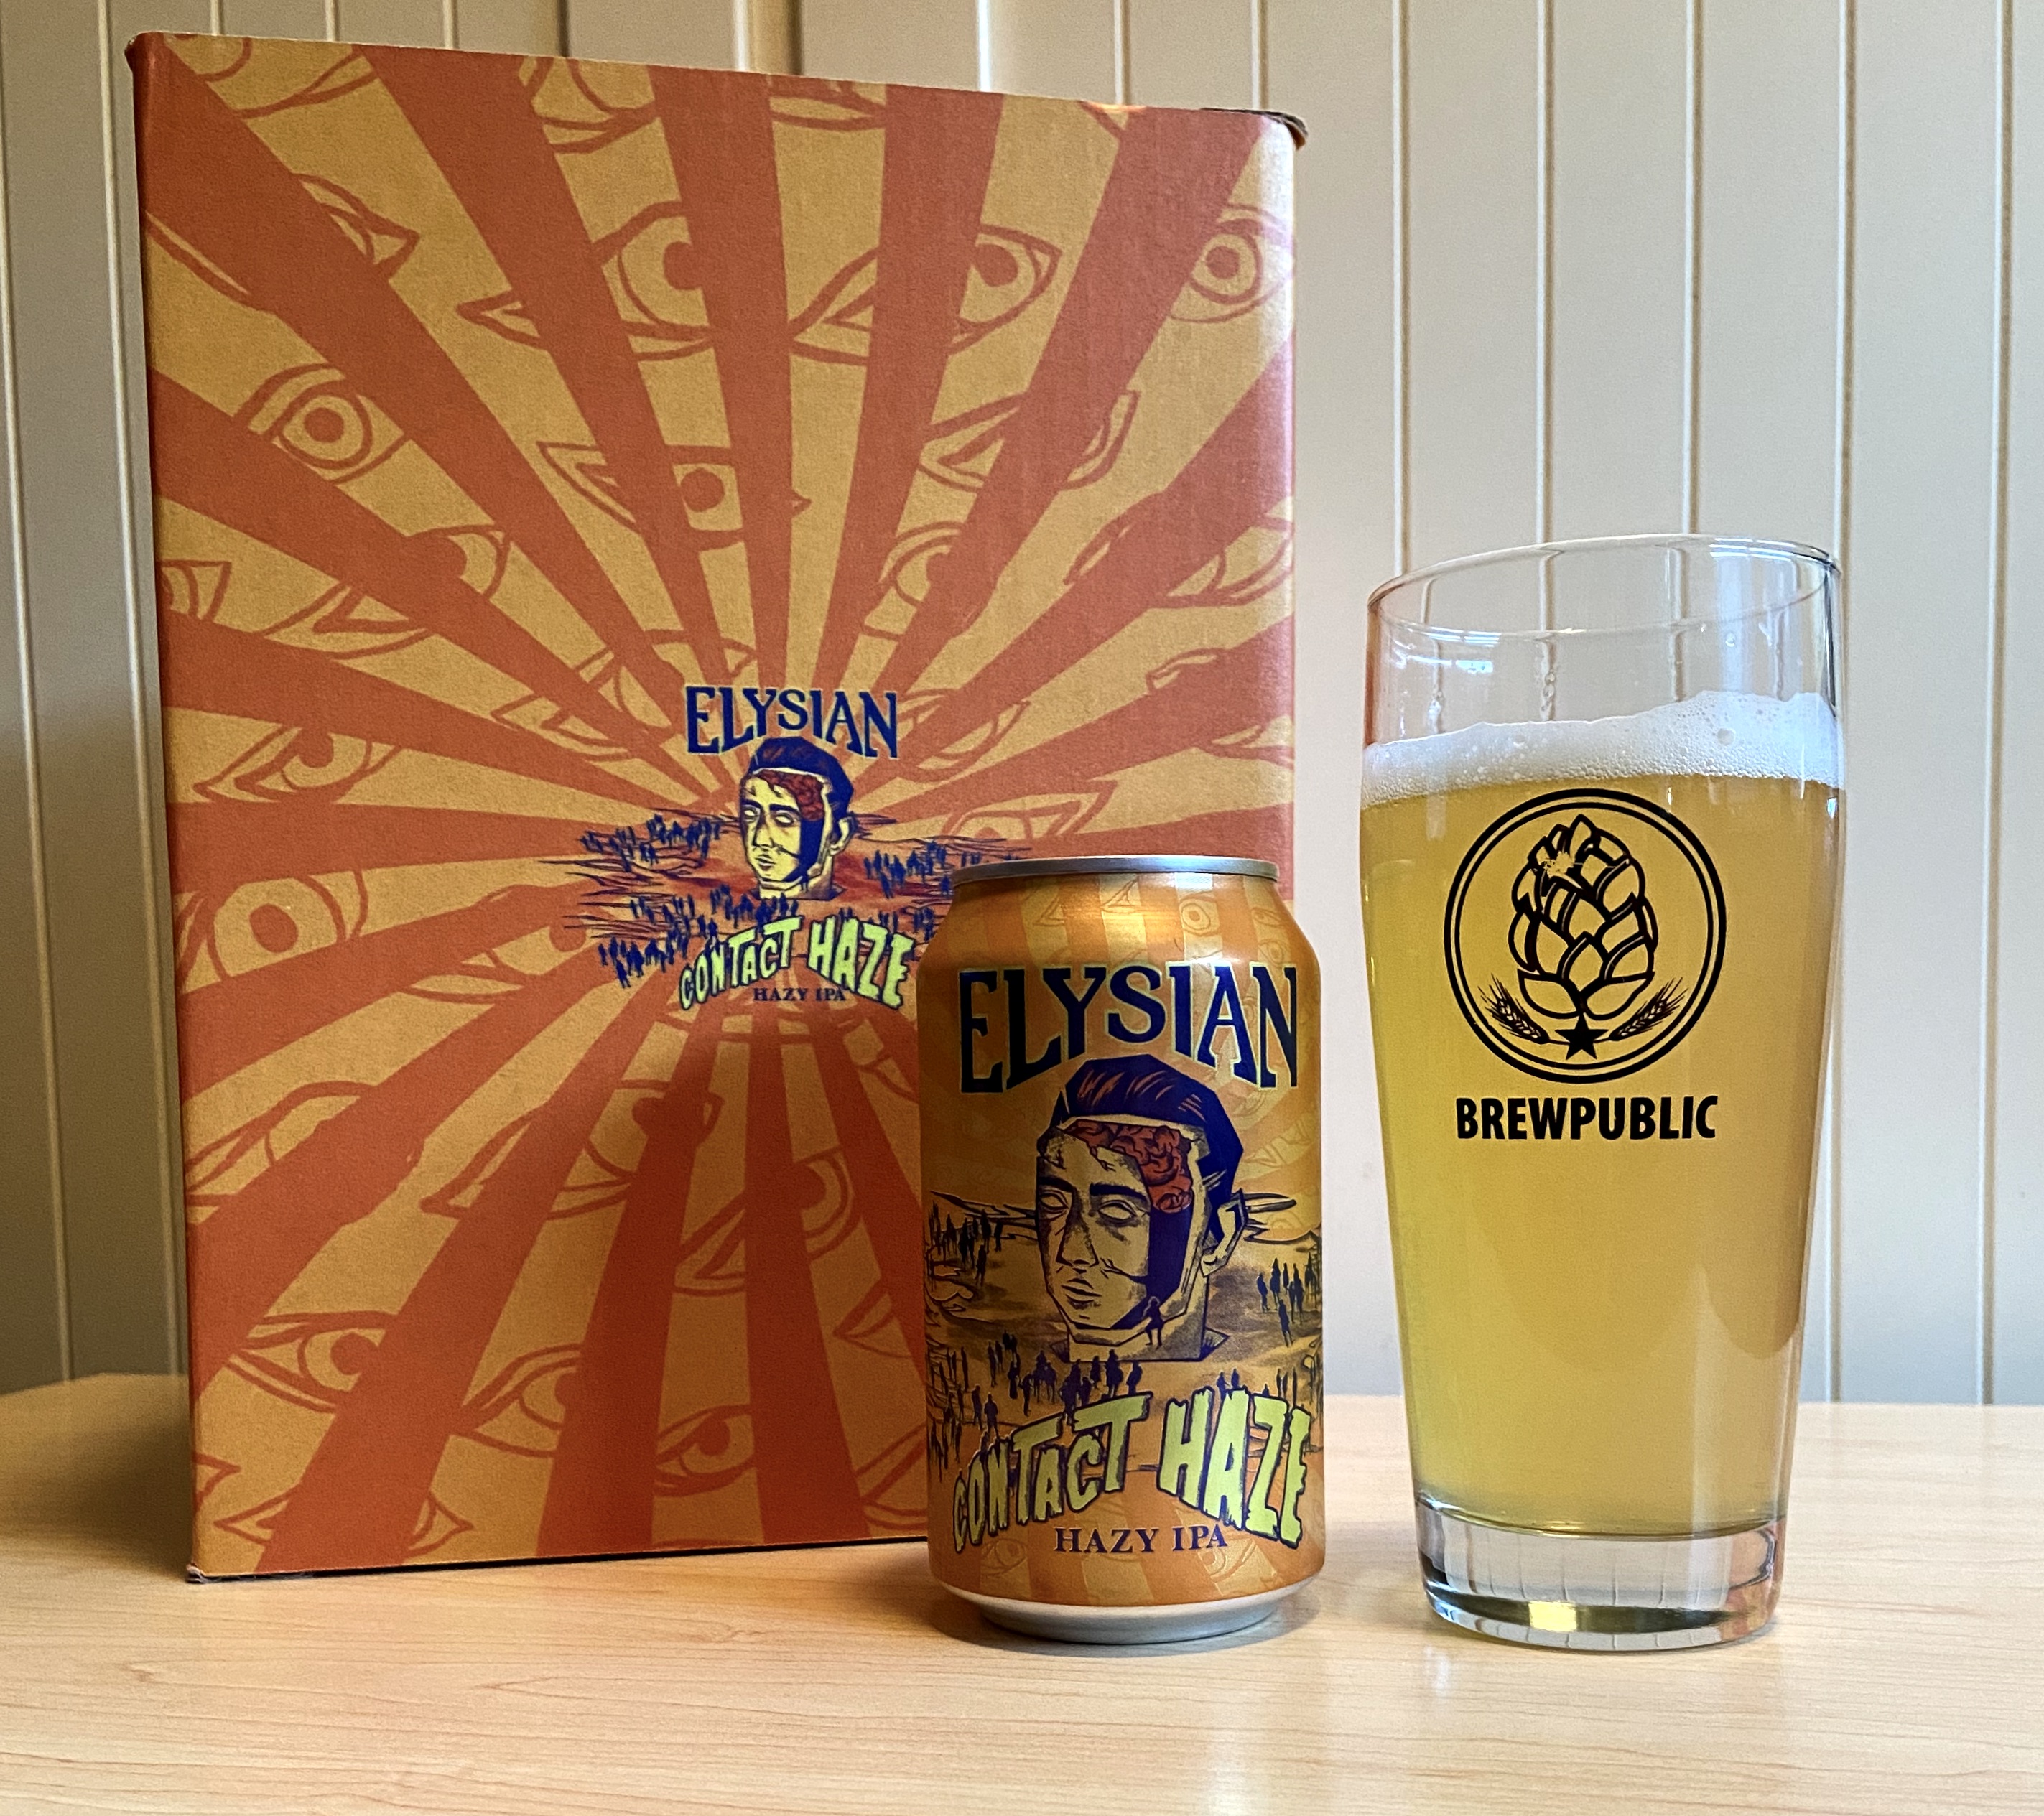 Elysian Brewing Contact Haze Hazy IPA served in a BREWPUBLIC glass.